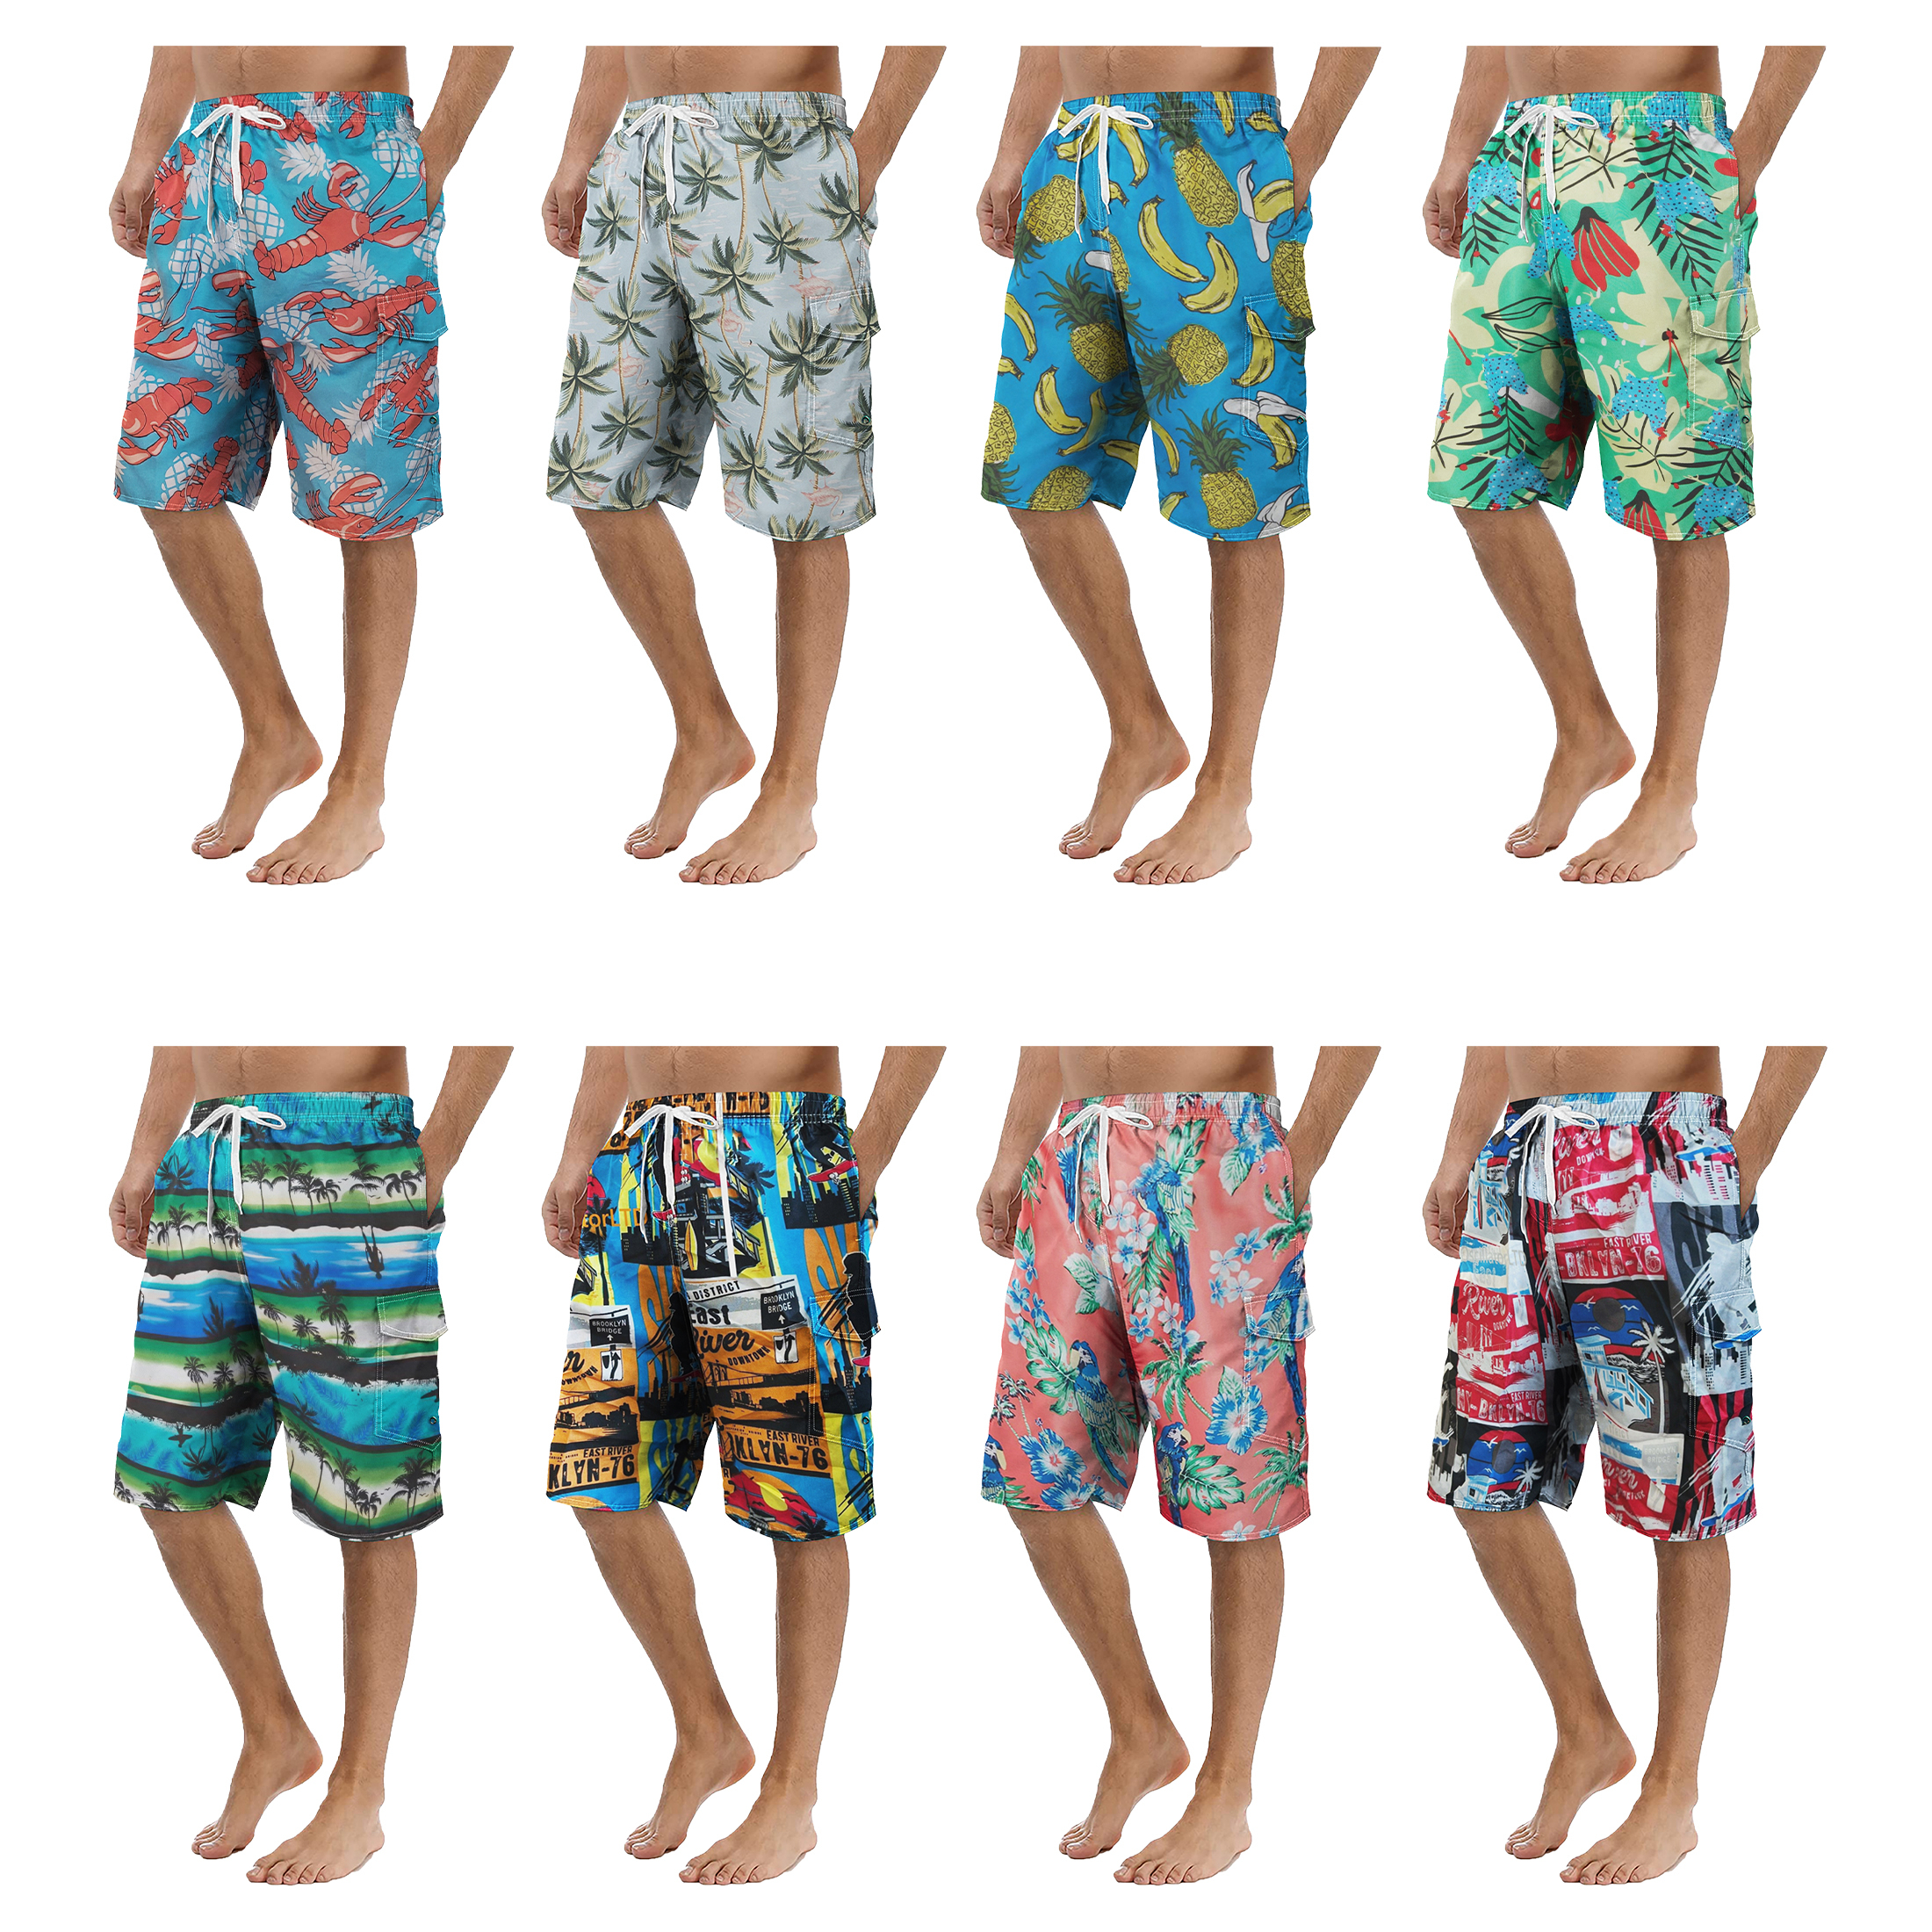 2-Pack Men's Quick Dry Printed Cargo Swim Shorts With Pockets Regular Flex Bathing Board Suits & Trunks - M